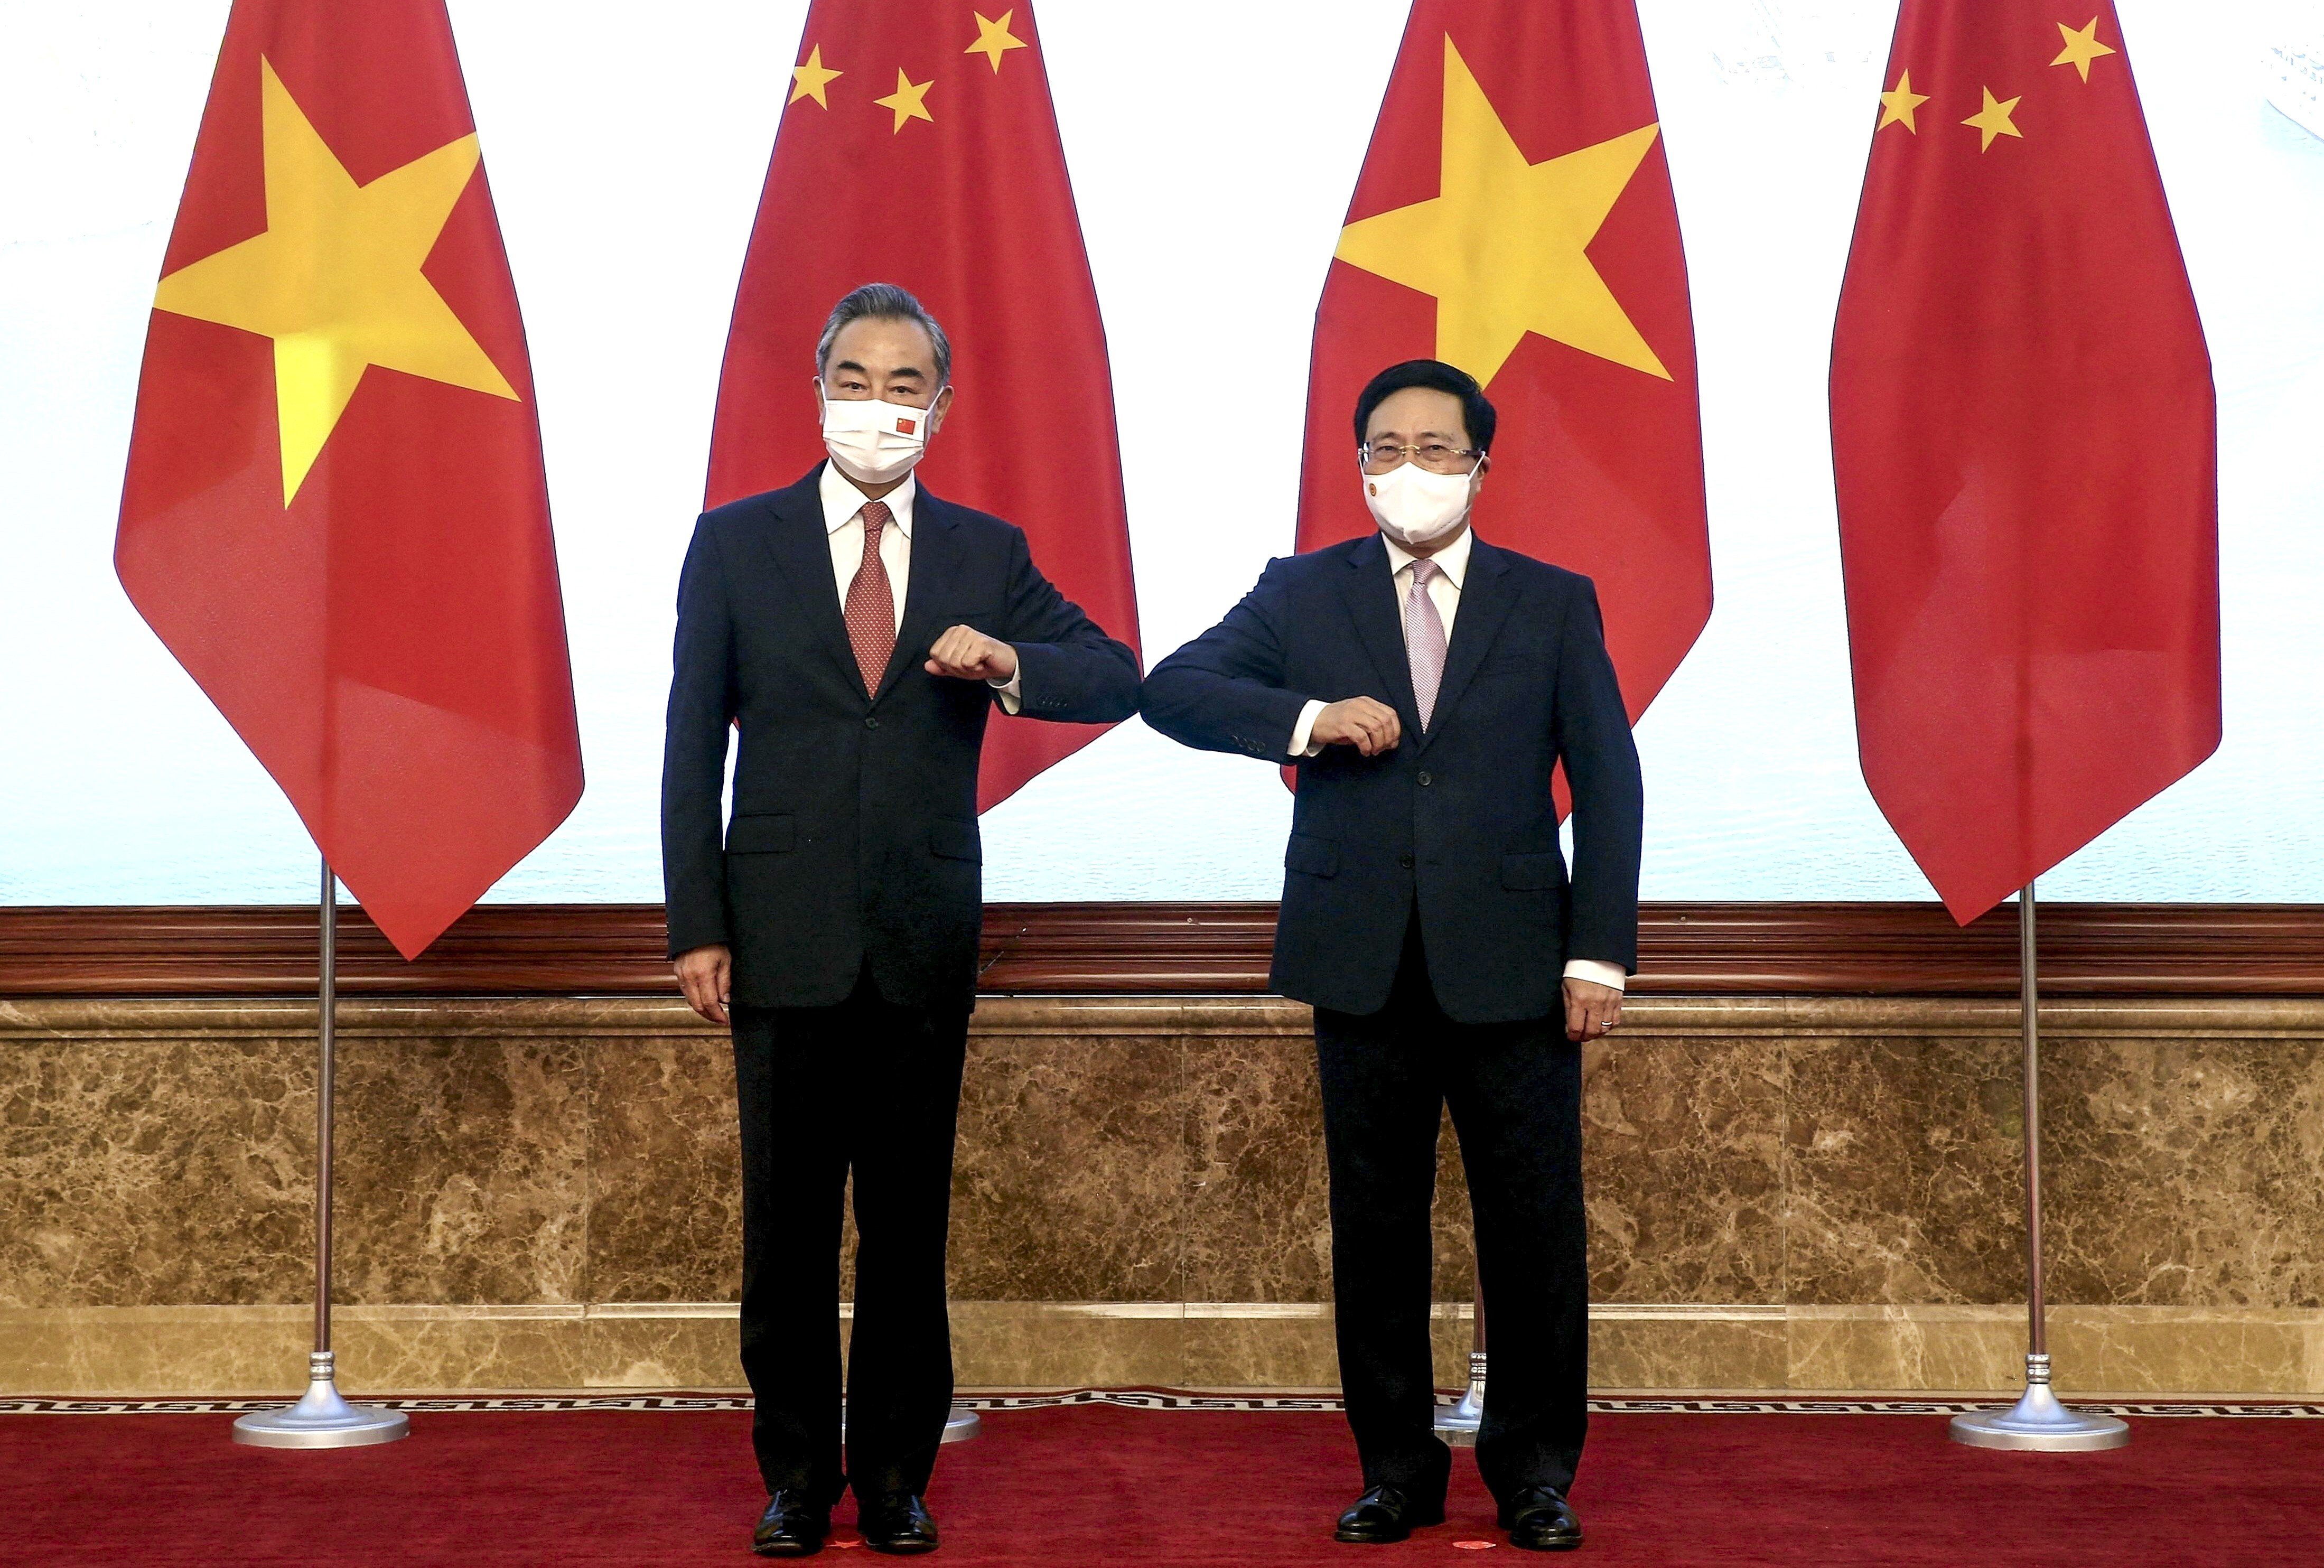 Vietnam’s Deputy Prime minister Pham Binh Minh (right) and Chinese Foreign Minister Wang Yi bump elbows in greeting before their meeting in Hanoi on September 10. Photo: Vietnam News Agency / AFP